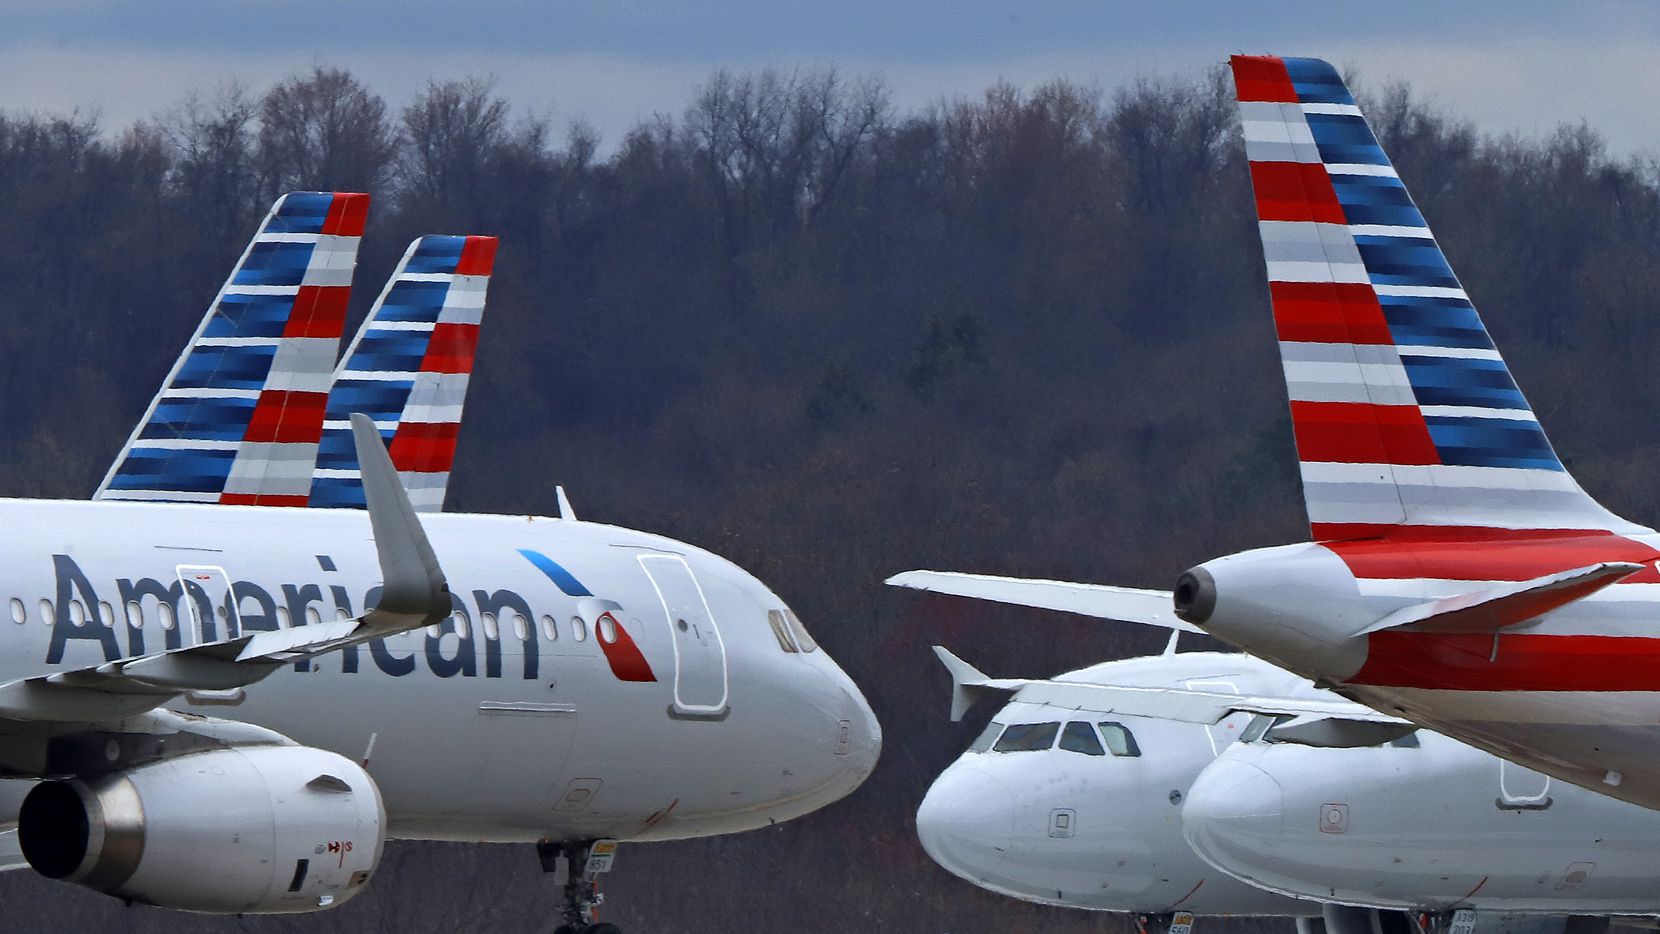 American Airlines is Making Black Lives Matter Pins for Crew Members, Upsetting Some Employees